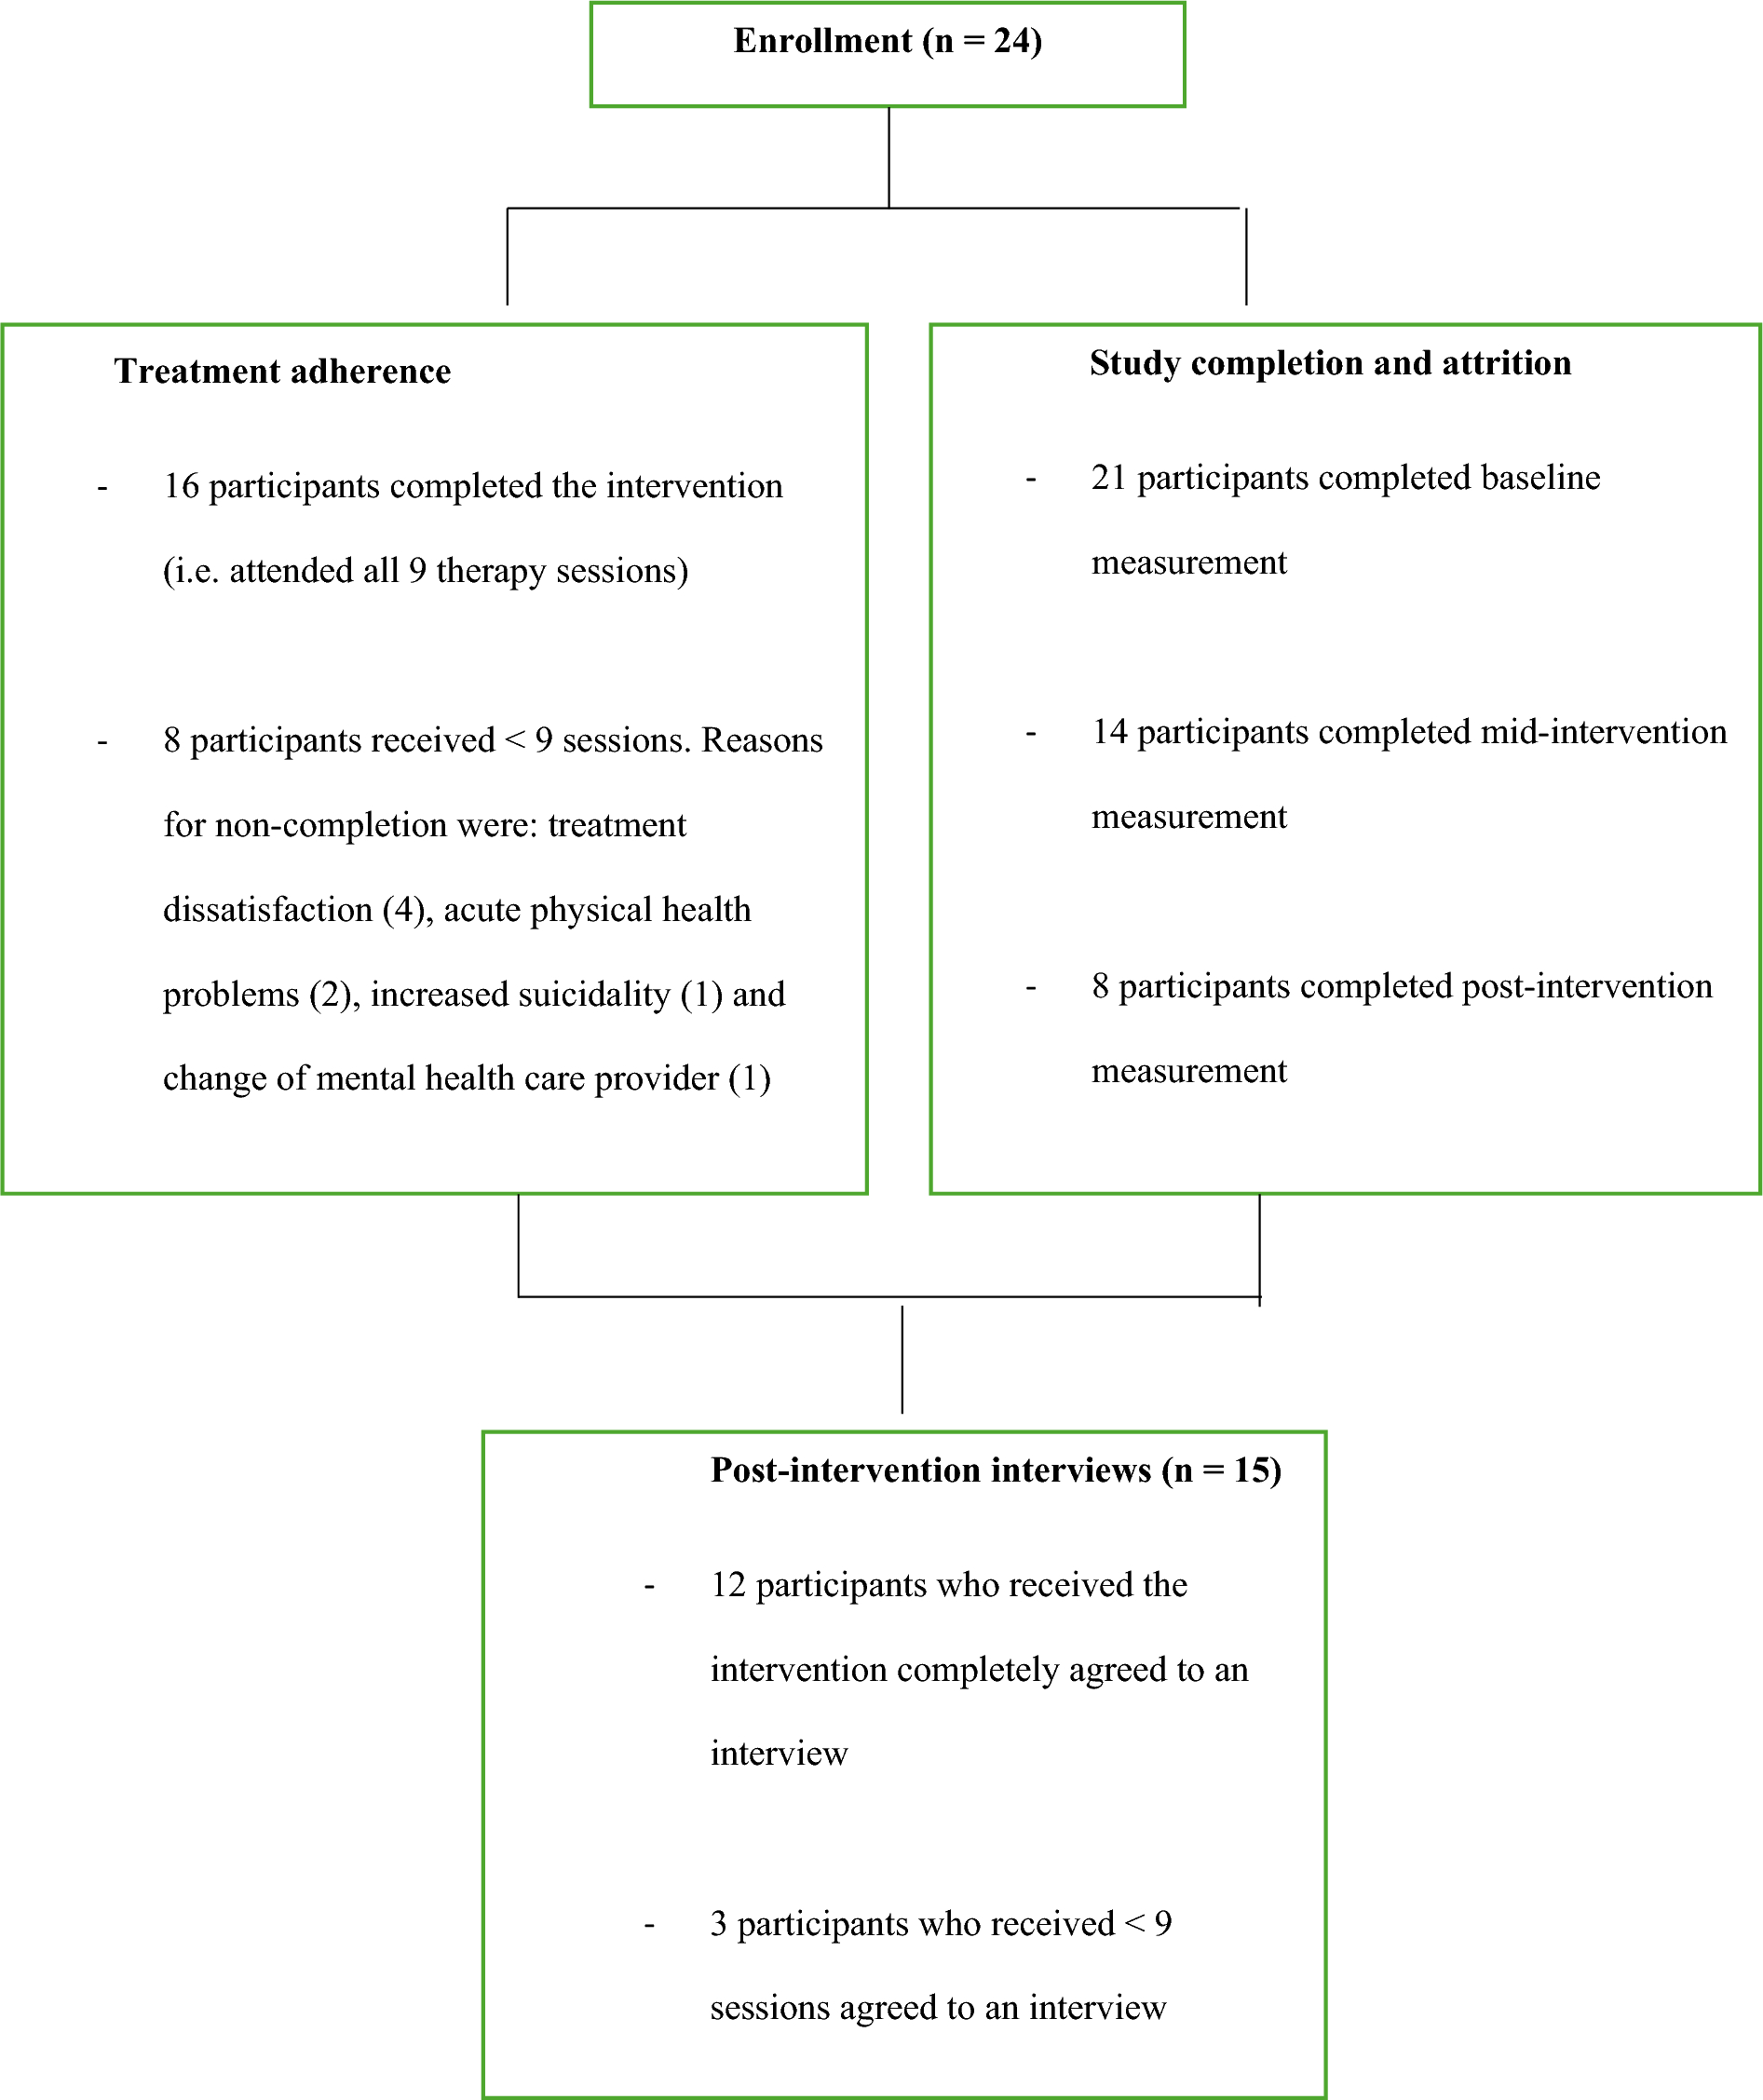 Exploring the Benefits and Acceptance of Blended Positive Psychotherapy as an Adjunctive Treatment for Clients with Residual Depressive Symptoms: A Mixed-Method Study